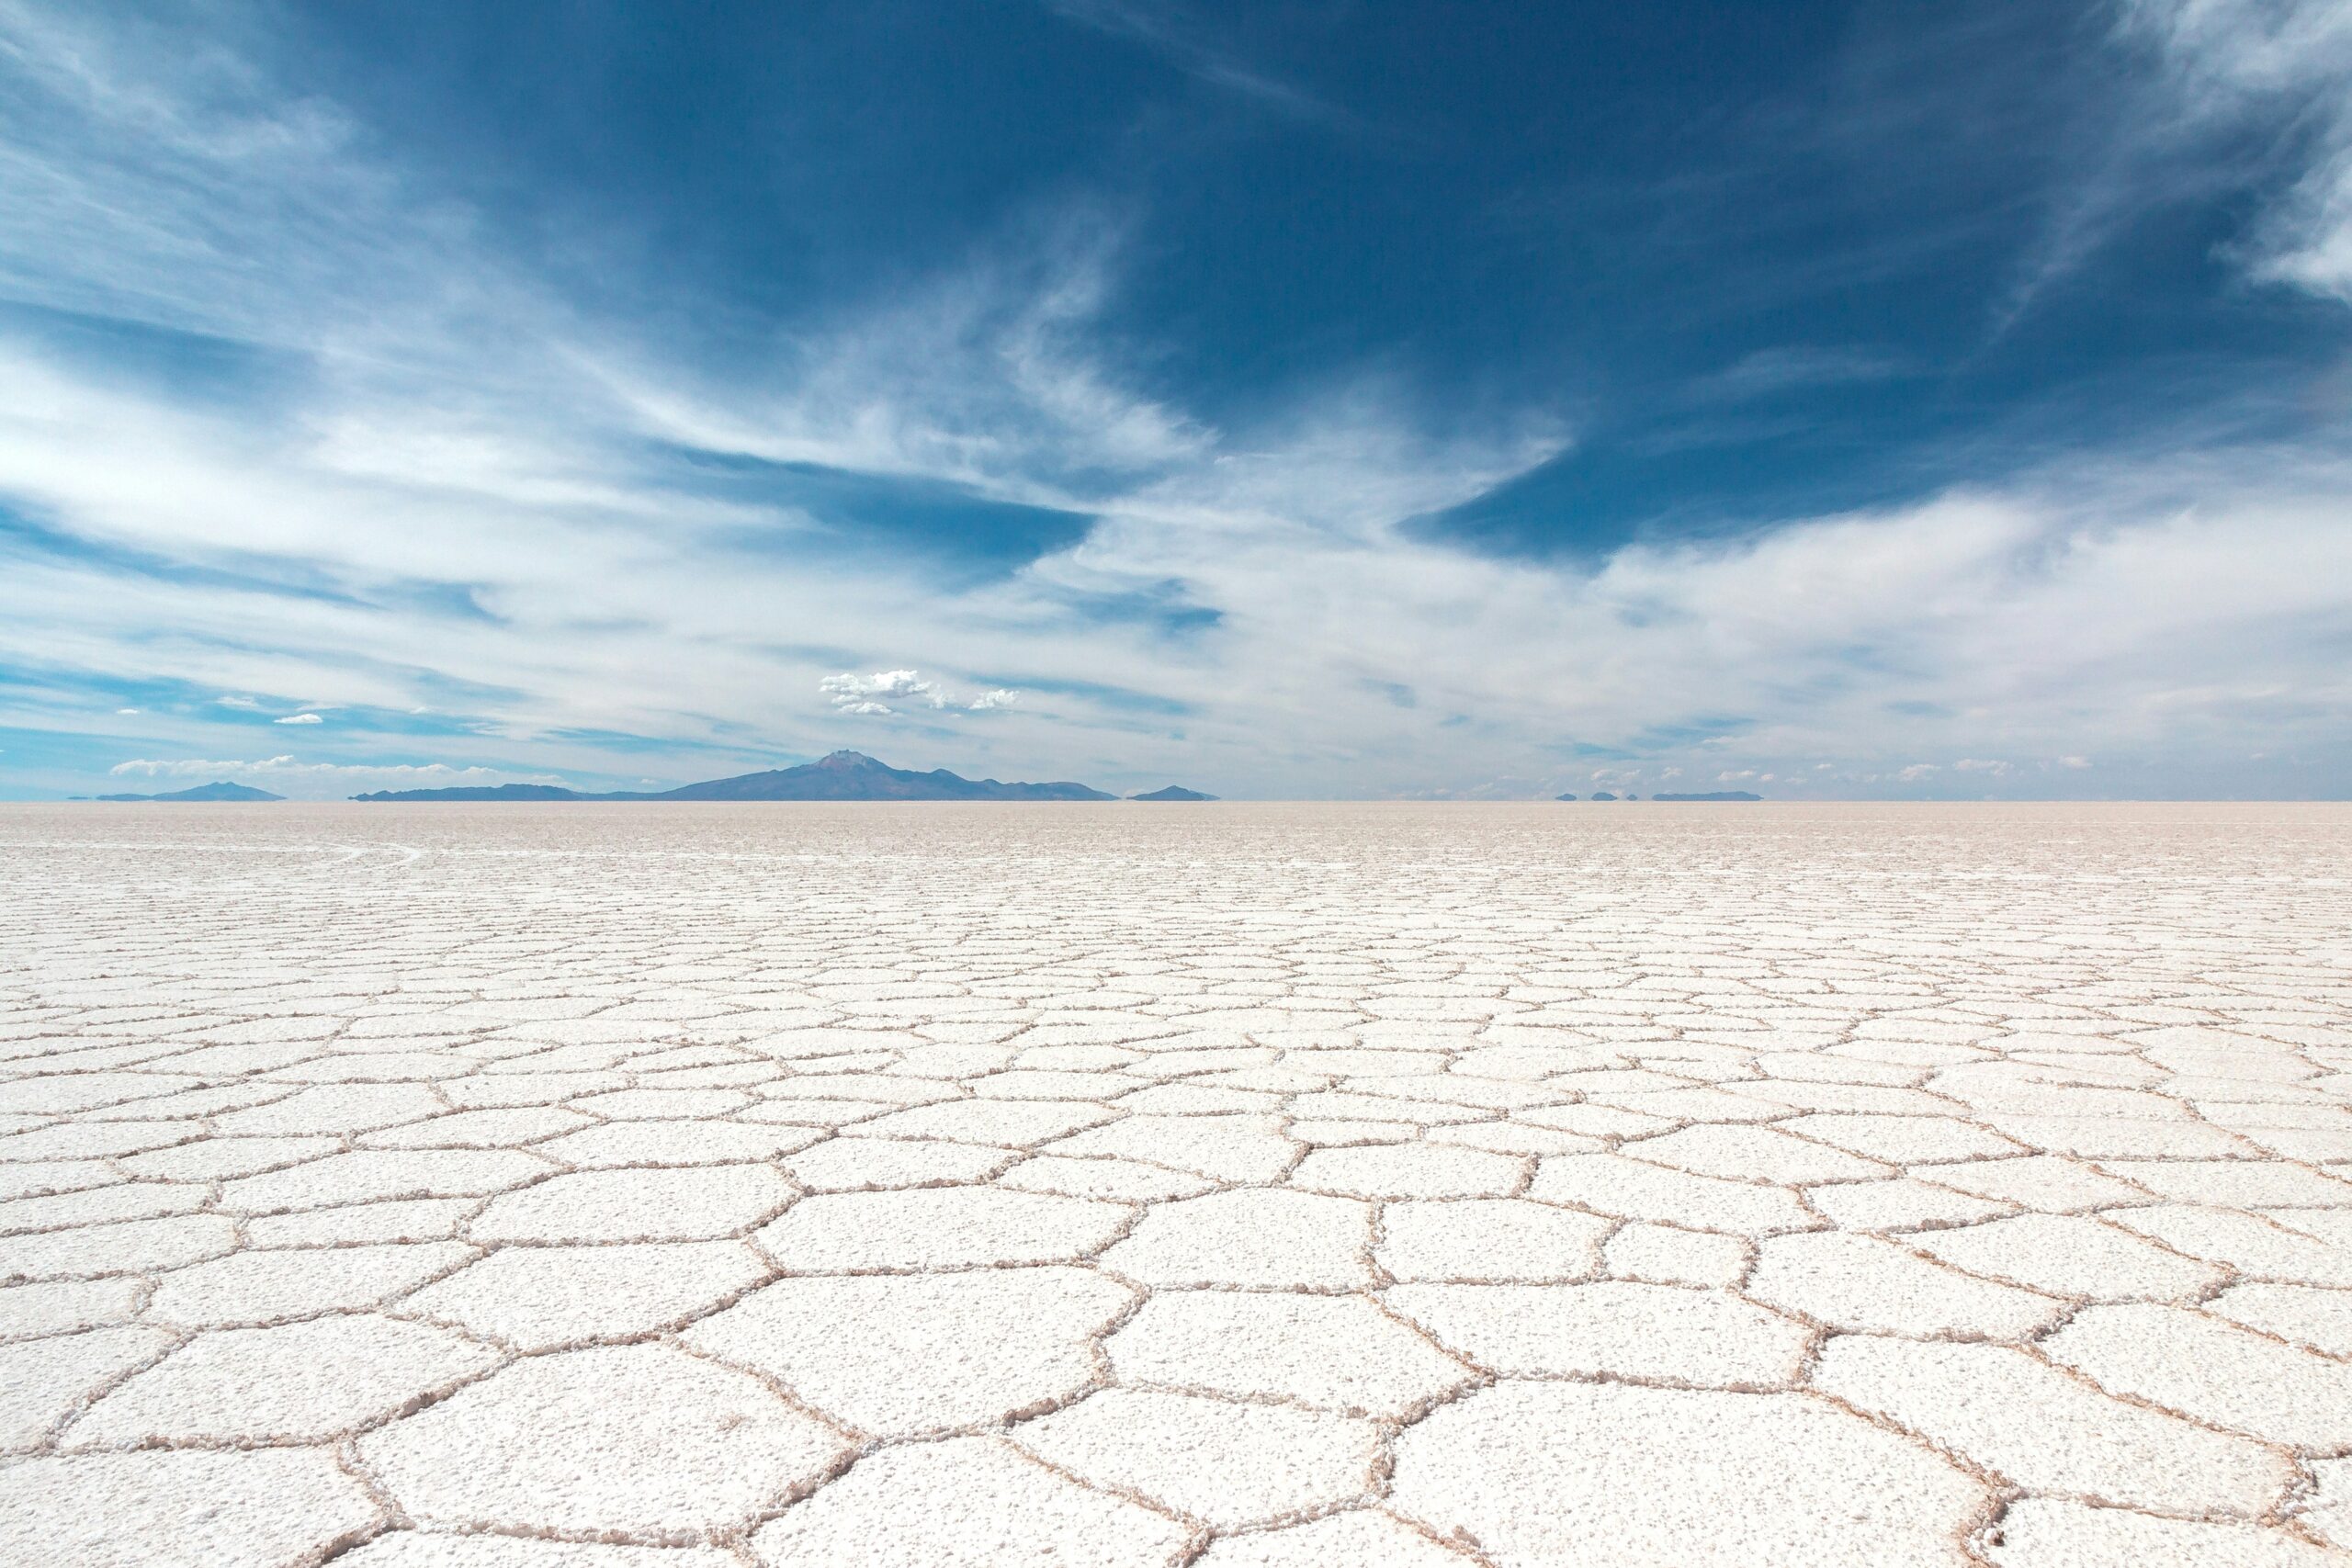 Here is what tourists should know before visiting the Uyuni salt flats. 
pictured: the Uyuni salt flats during dry season 